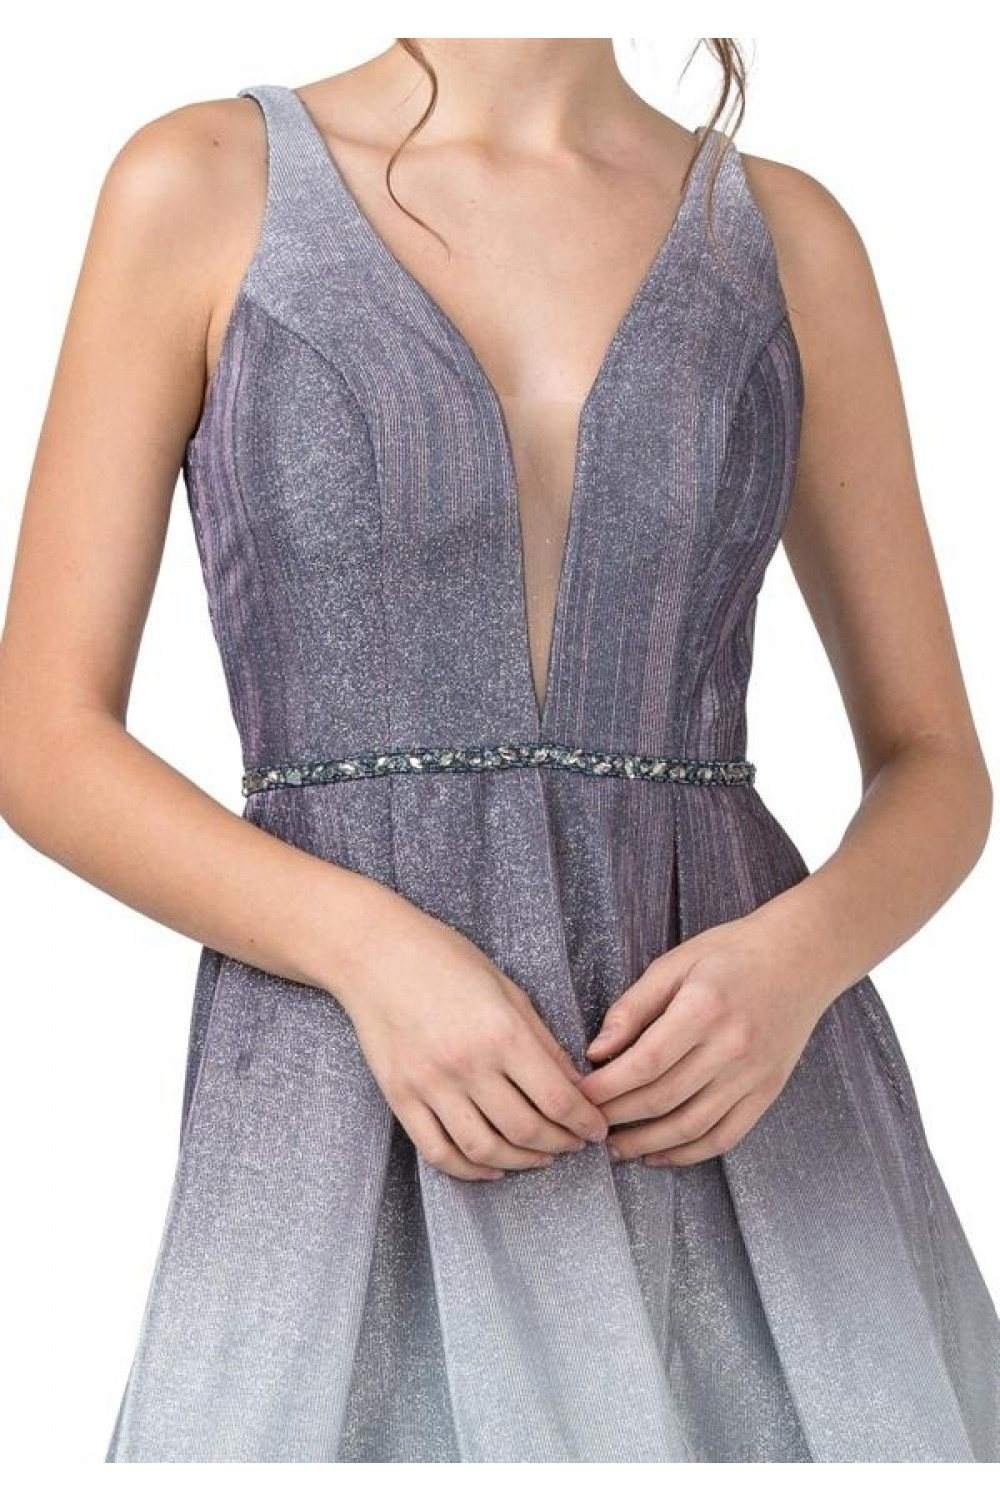 Aspeed Design S2290 Appliqued Back Ombre Homecoming Short Dress Charcoal